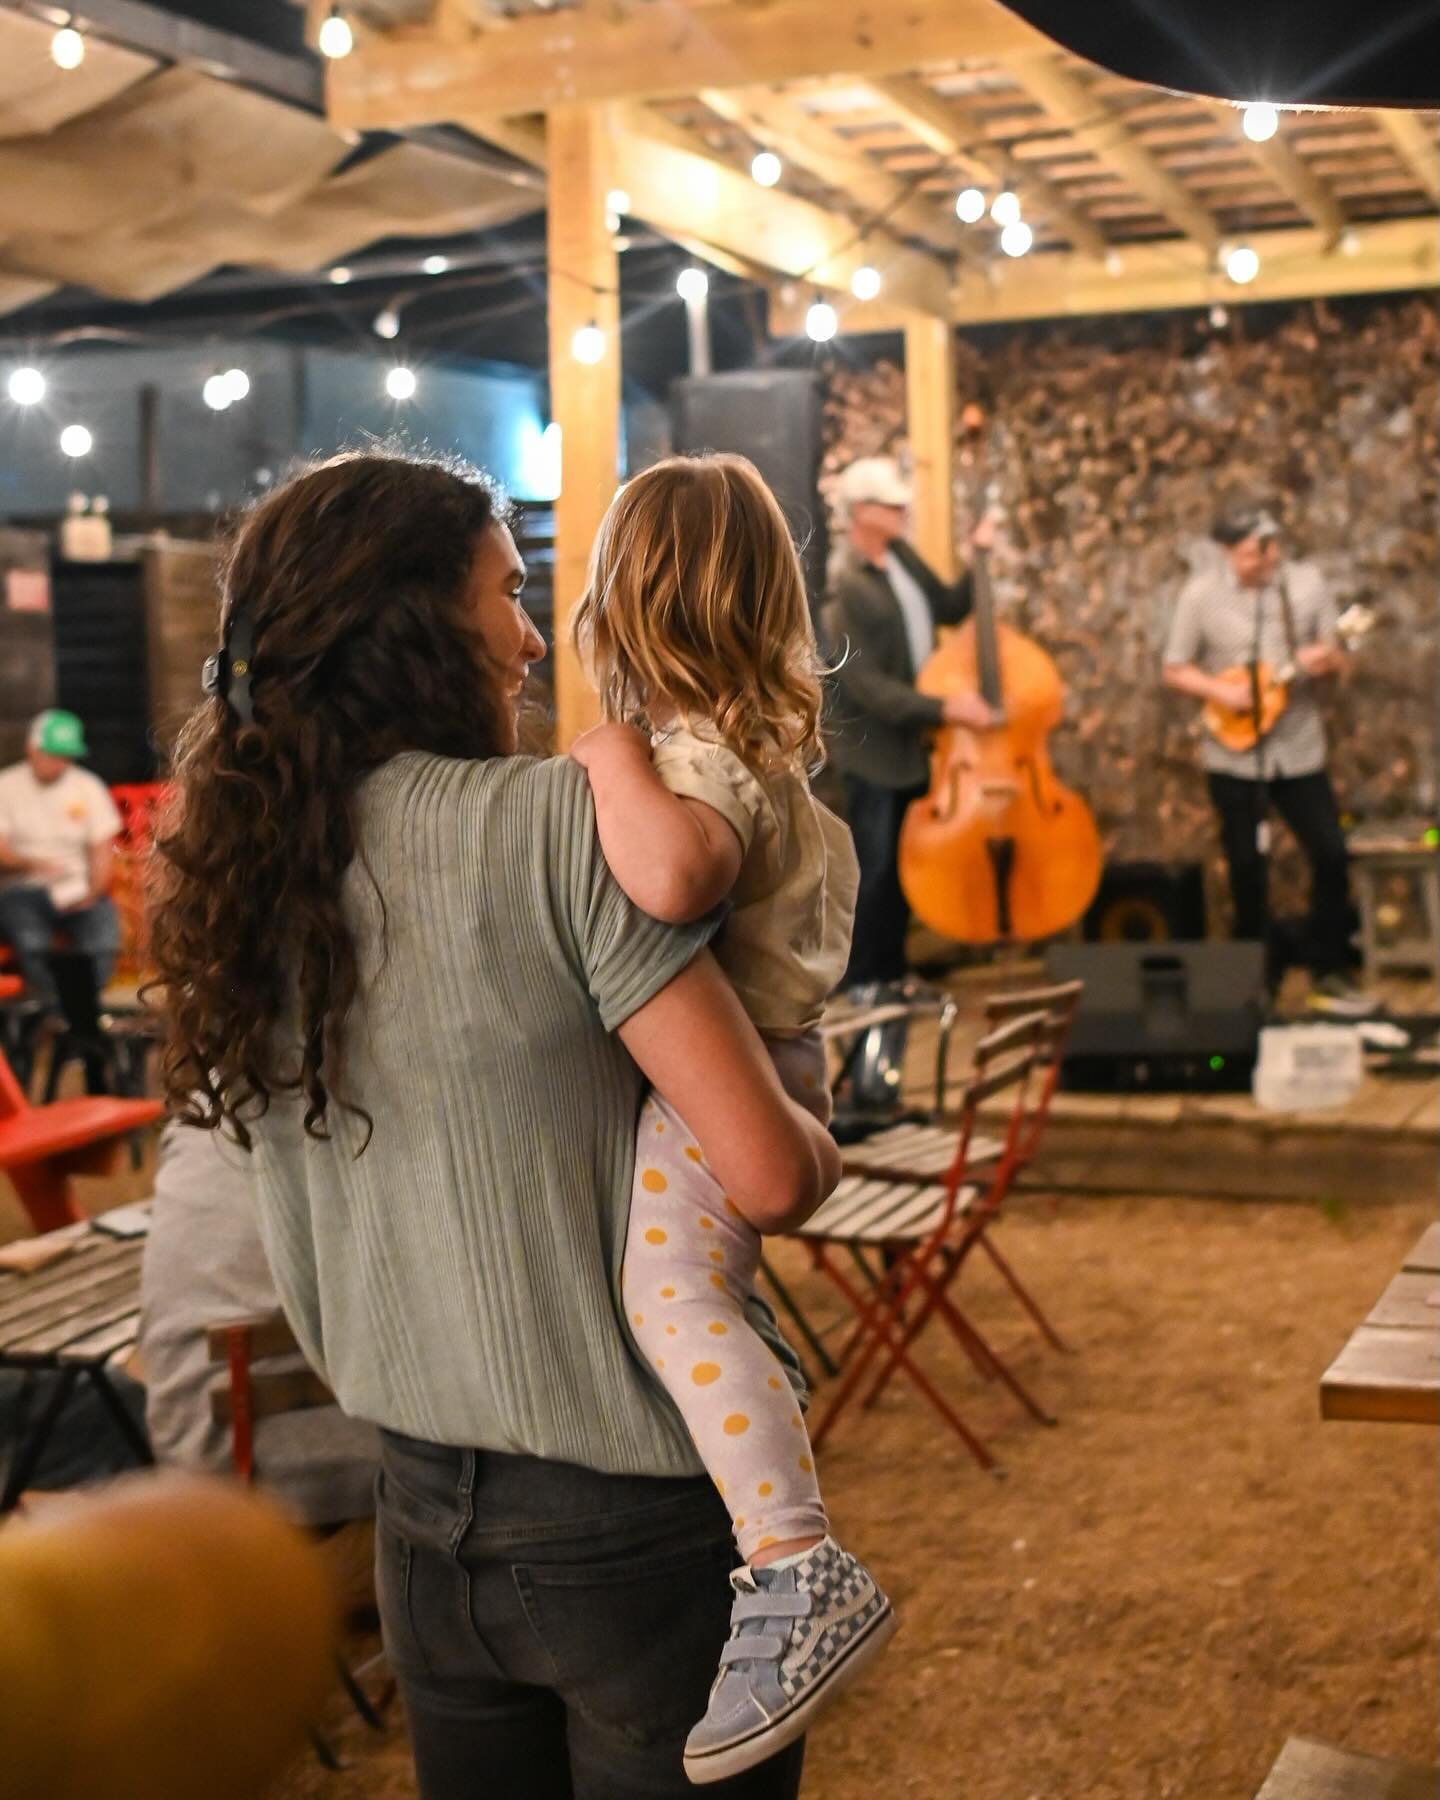 Let&rsquo;s get Grassy! 🎻🎶

It&rsquo;s Thursday! You know what that means! Live Bluegrass in the beer garden! 

Join us this Thursday (and every Thursday) for live music on the St. Elmo stage. 

Photos by @__roseflower ✨